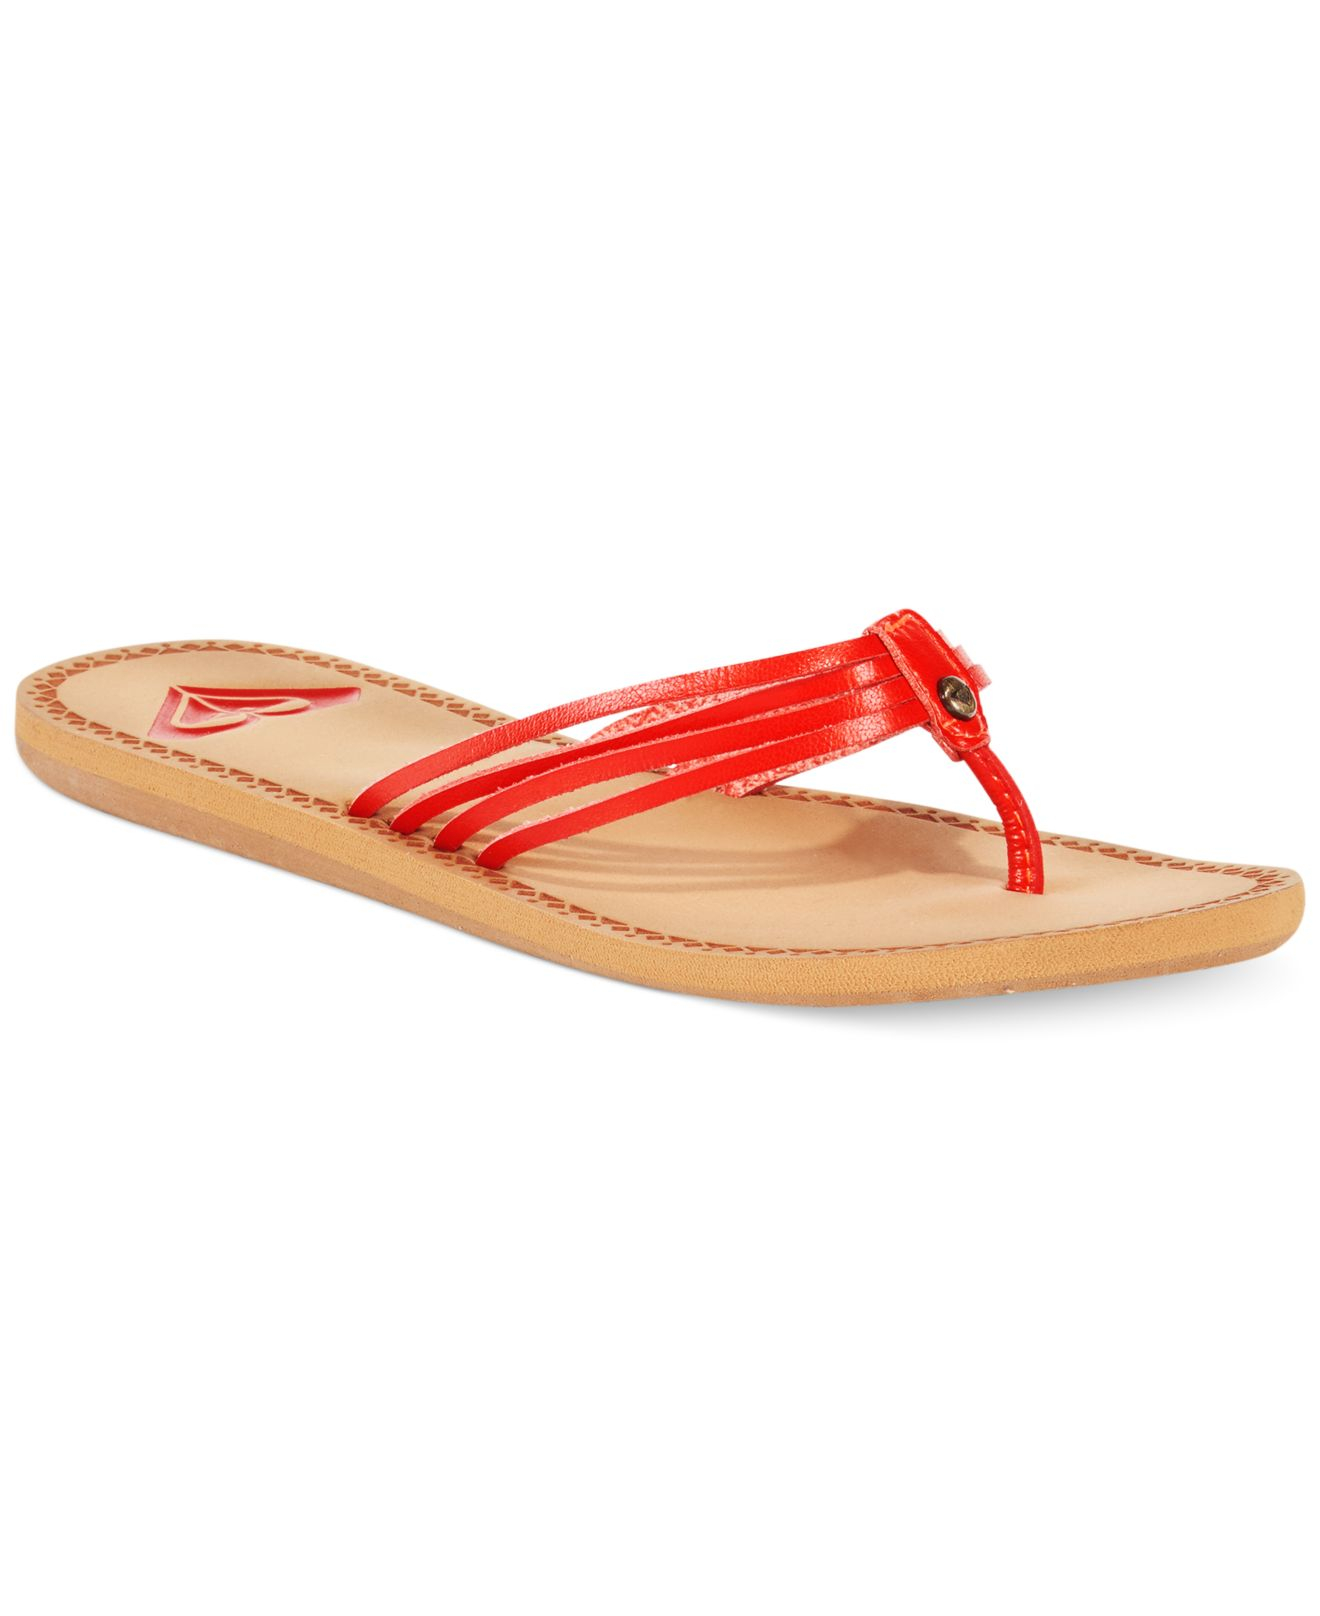 Roxy Riviera Thong Sandals in Red | Lyst